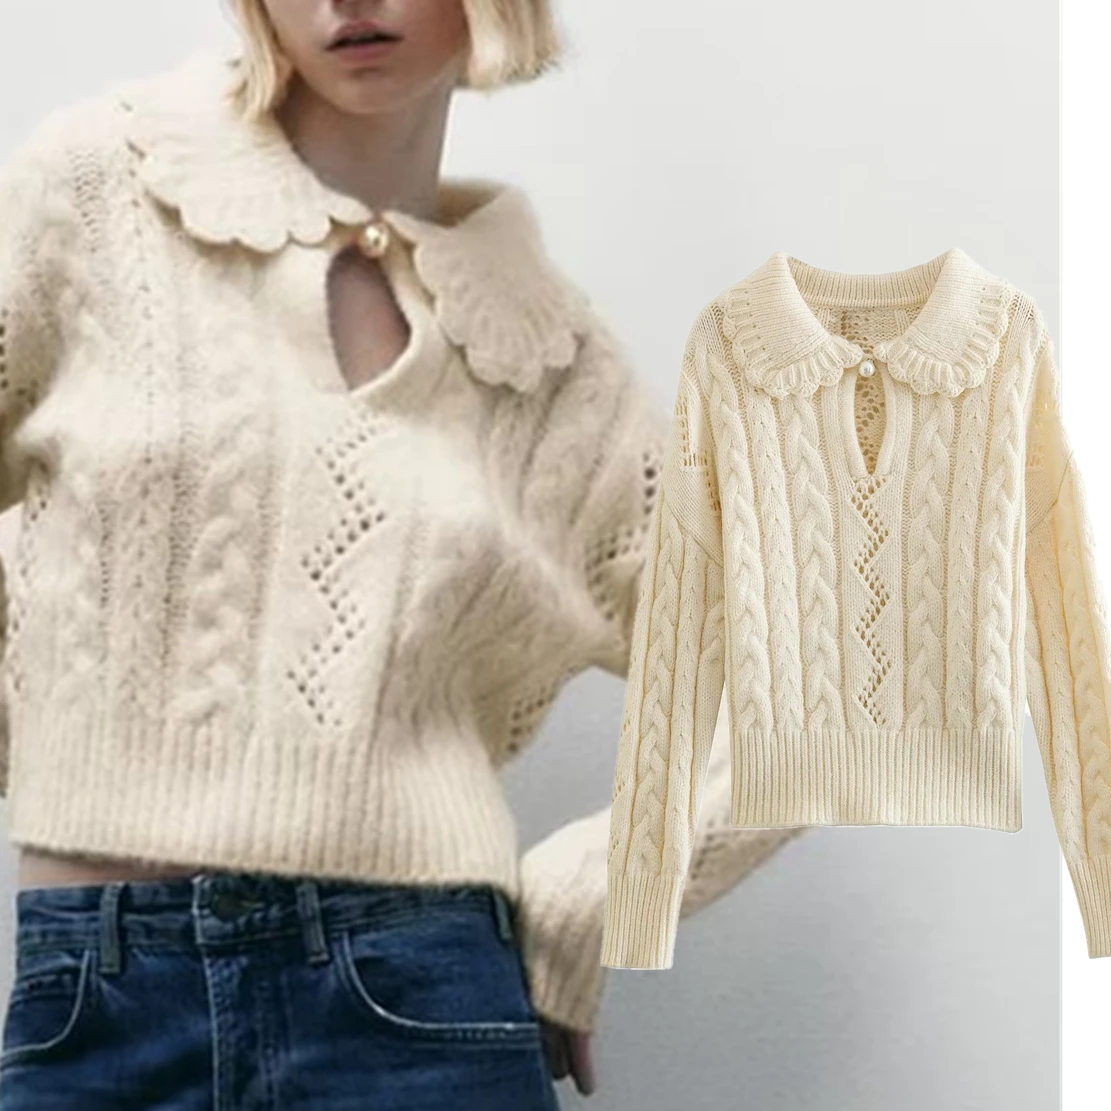 

Elmsk French Casual Sweaters Women Indie Folk Peter Pan Collar Pearls Buttons Jacquard Knitwear